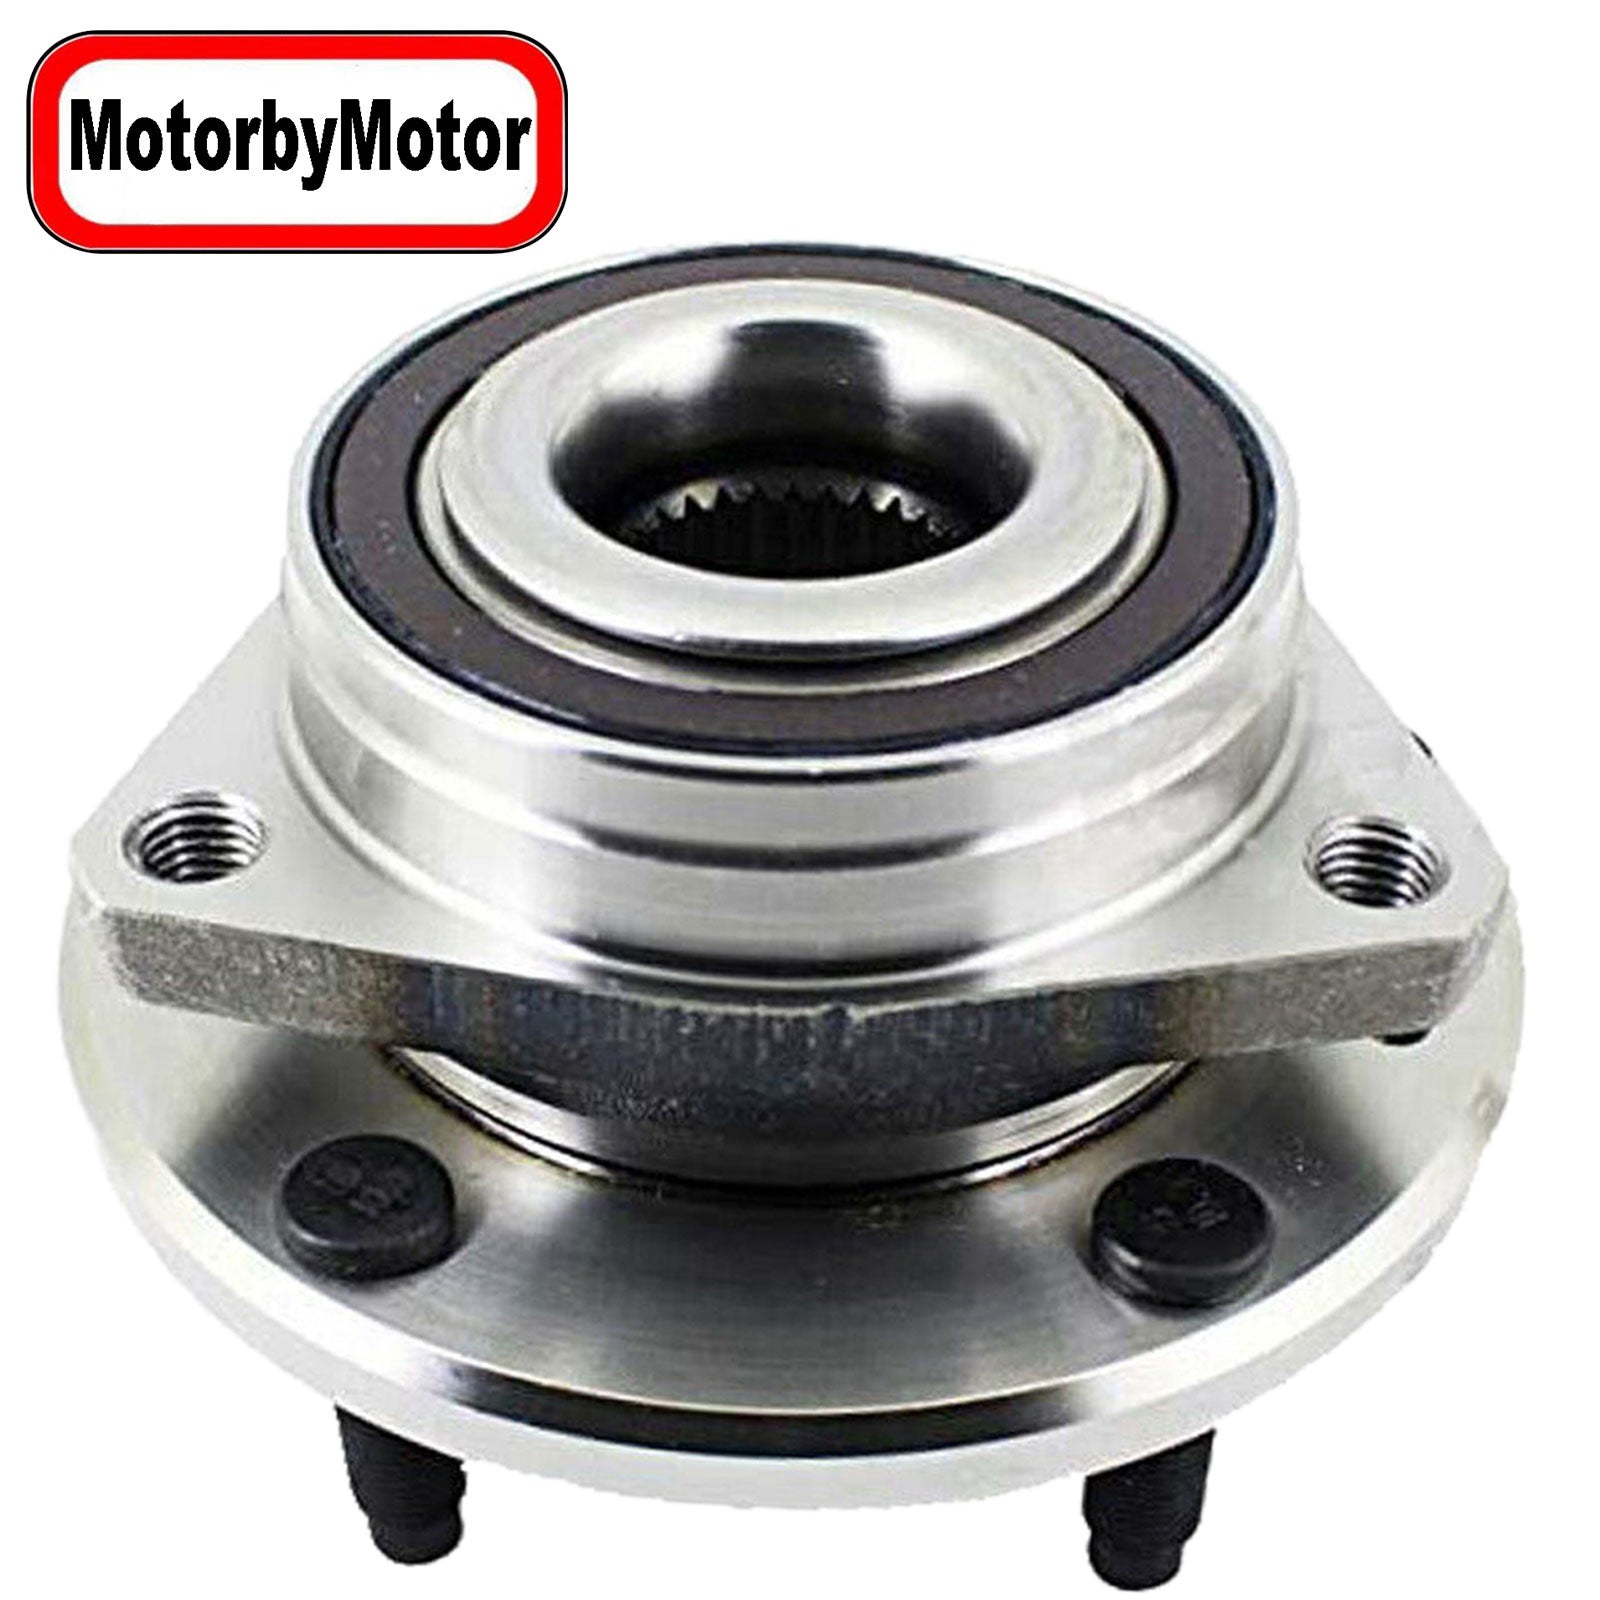 MotorbyMotor 515021 Front Wheel Bearing and Hub Assembly with 6 Lugs Fits for Ford F-250 F-350 Super Duty Low-Runout OE Directly Replacement Hub Bearing (w/2 Wheel ABS) MotorbyMotor